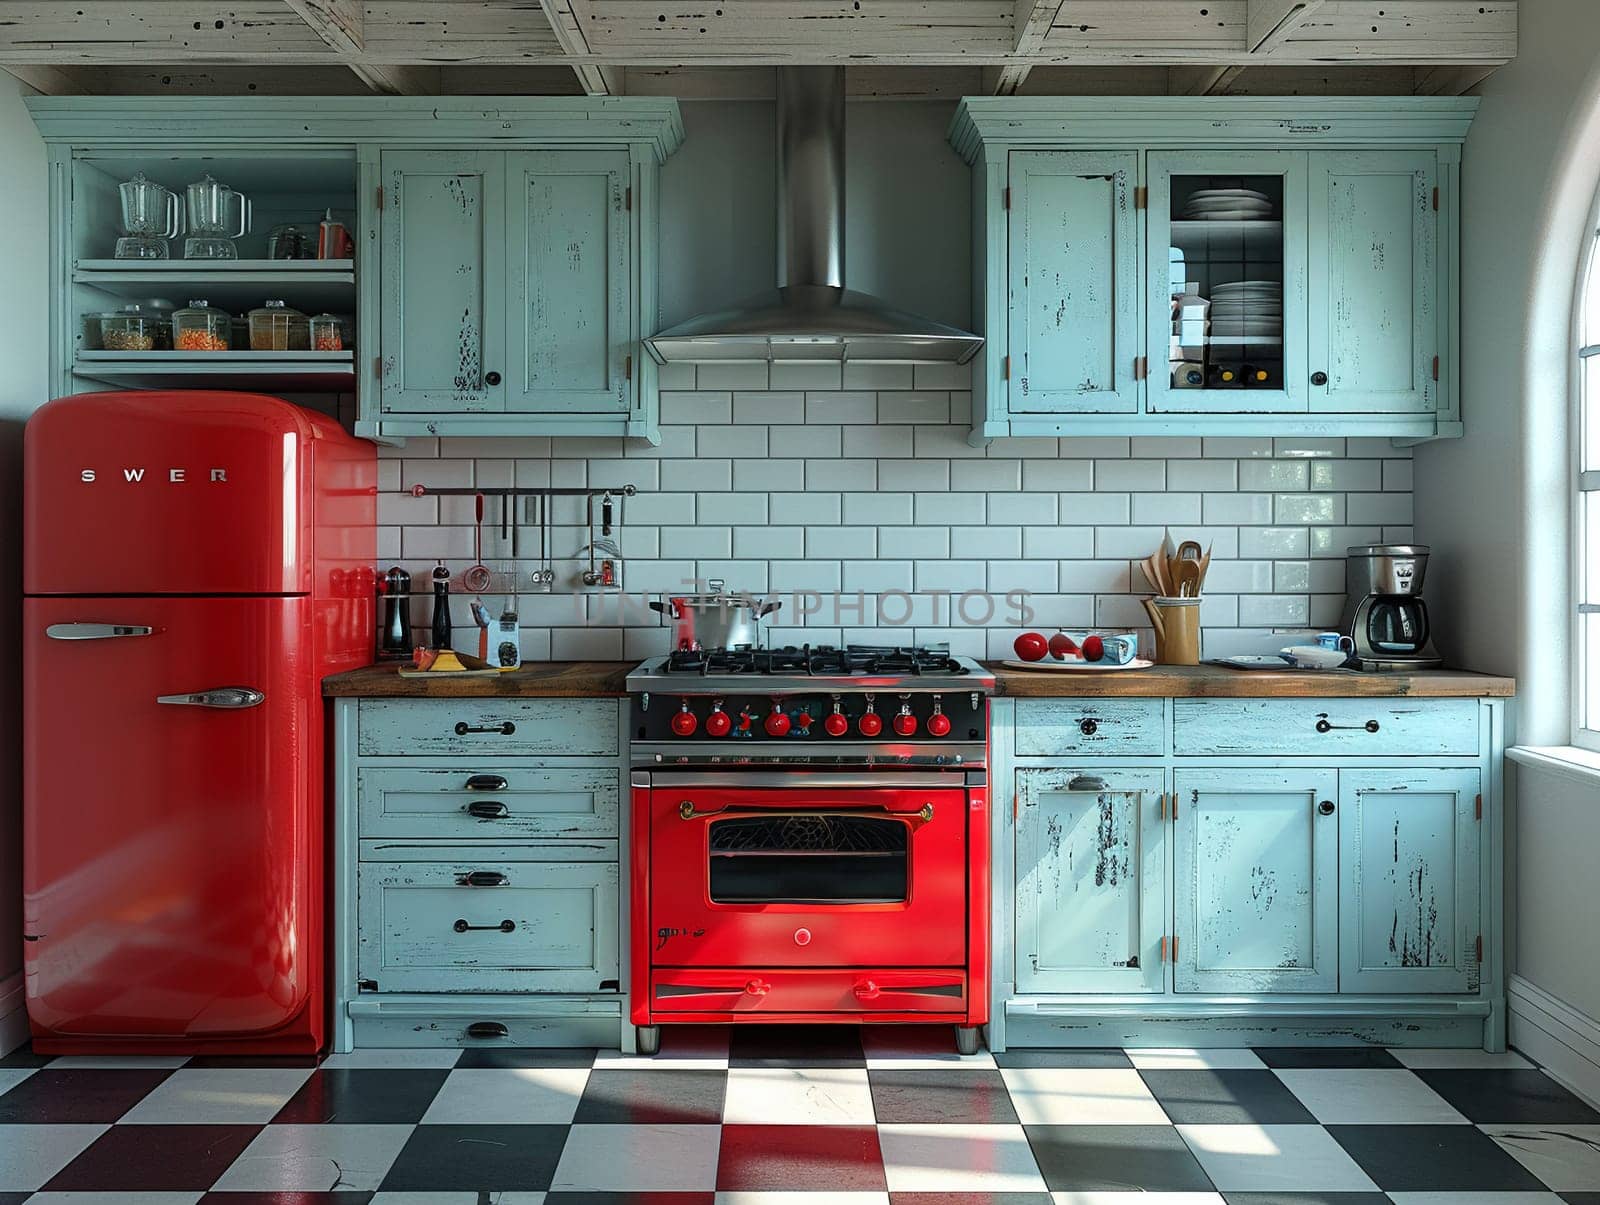 Vintage diner-inspired kitchen with checkered floors and retro appliances8K